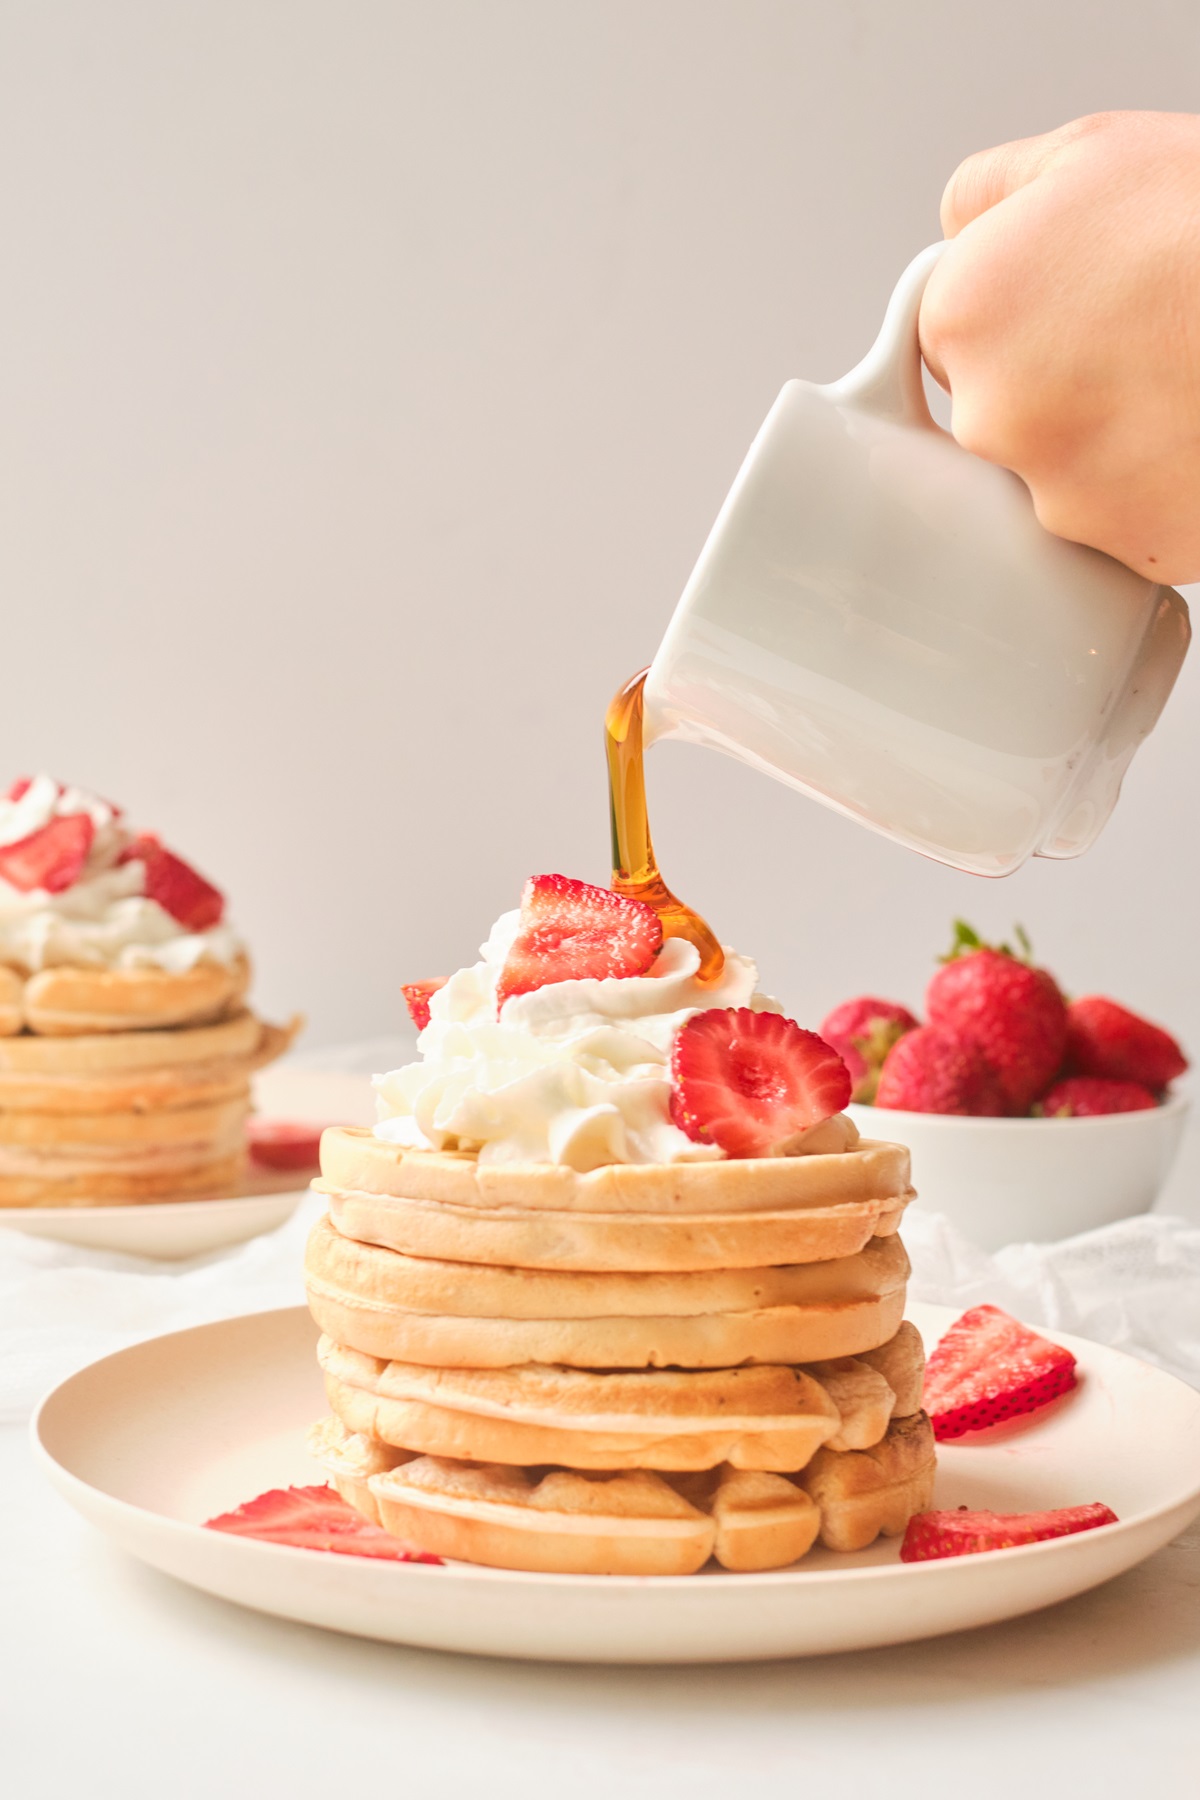 Syrup being poured onto a strawberry waffle recipe stack.